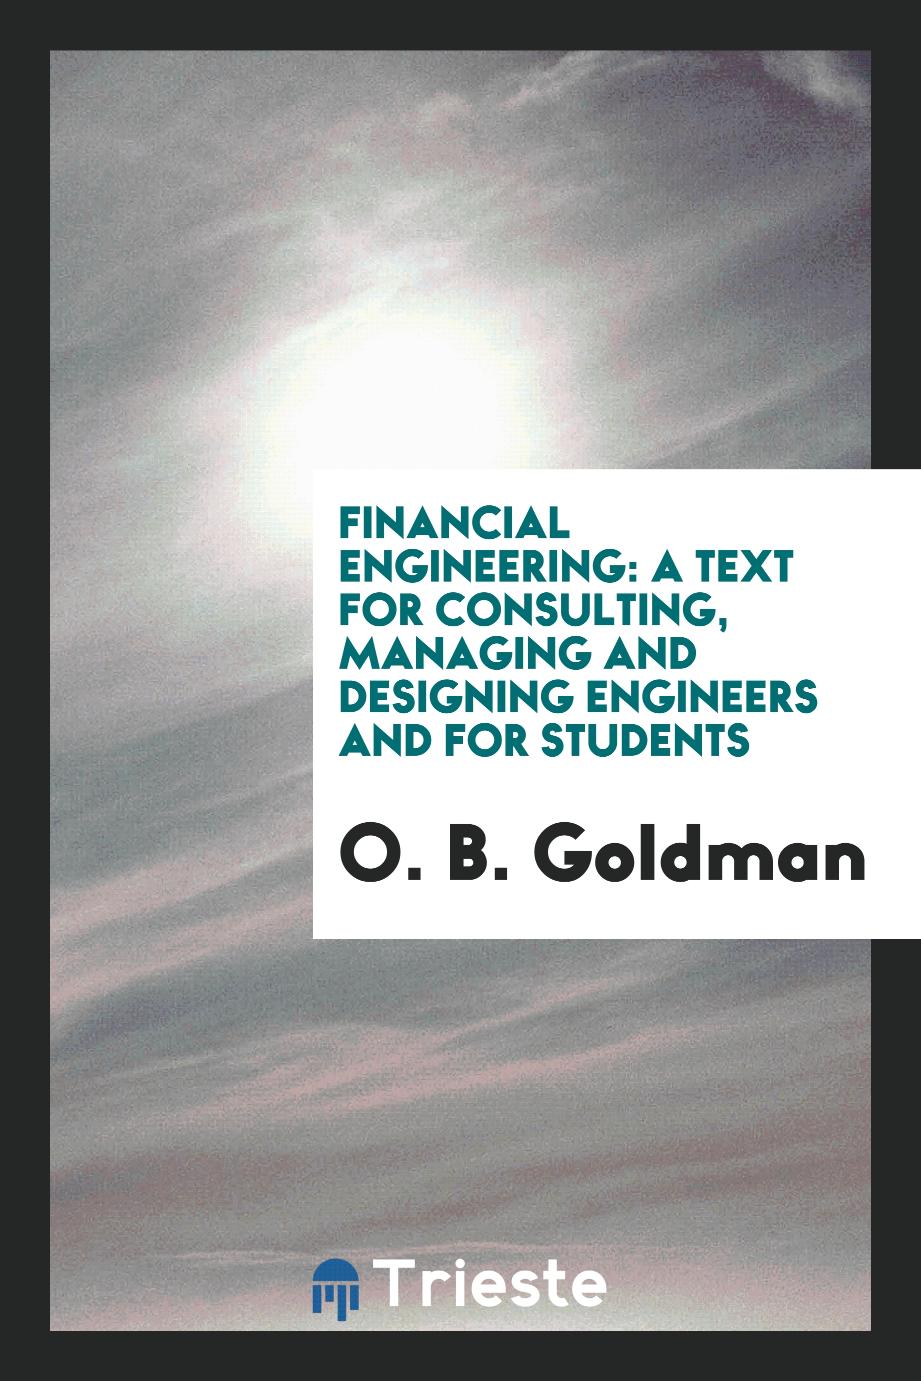 Financial Engineering: A Text for Consulting, Managing and Designing Engineers and for Students